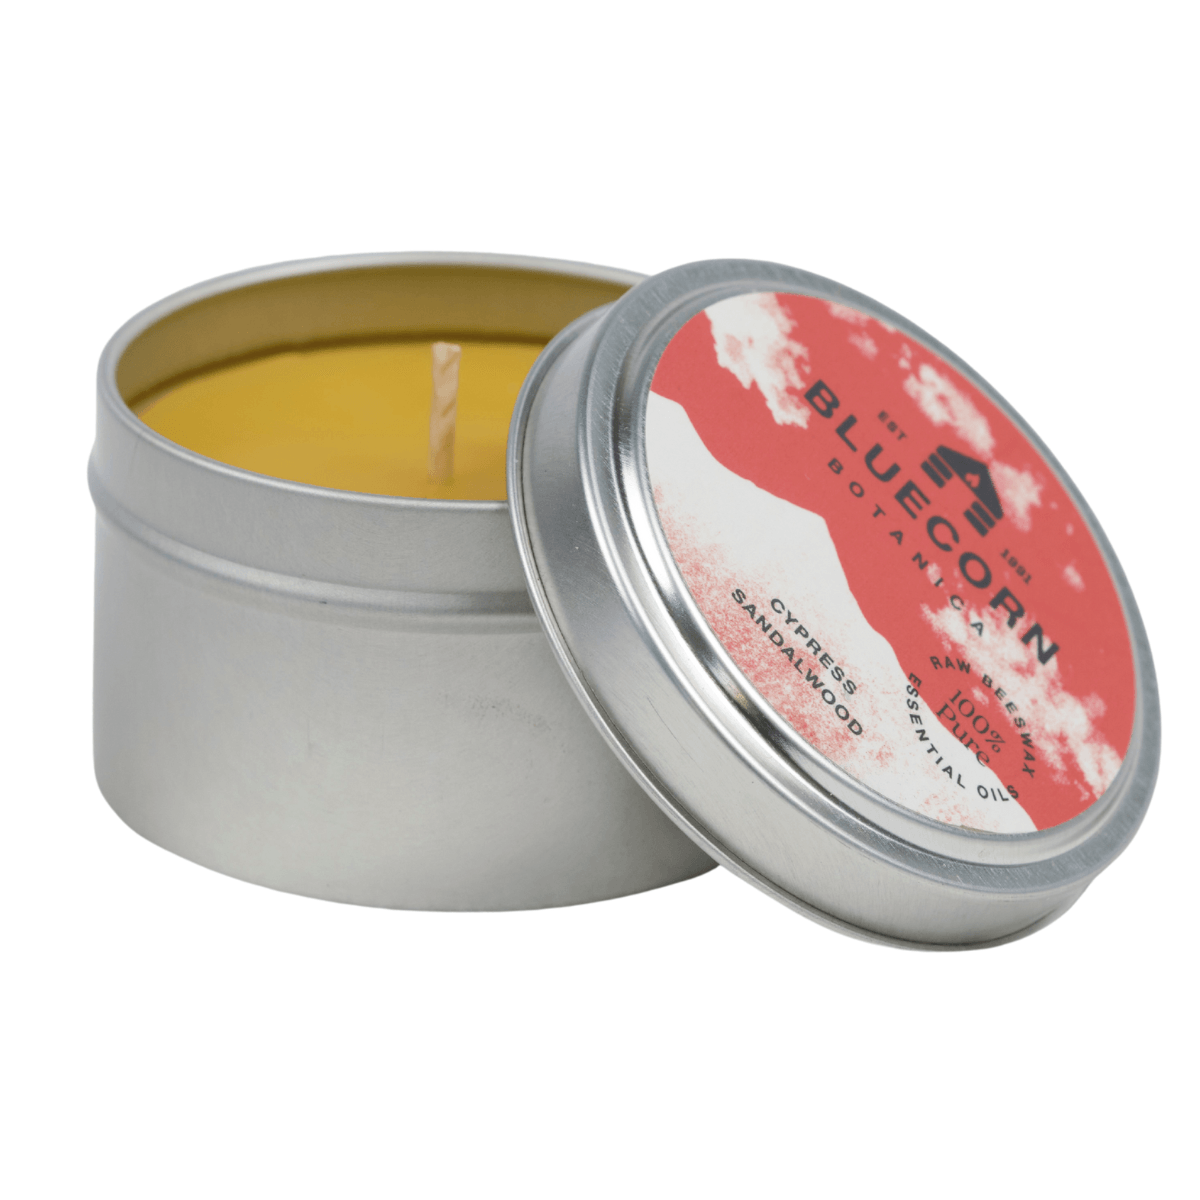 Bluecorn Botanica Cypress and Sandalwood 100% Pure Beeswax Travel Tin Candle. Burn Time: 6oz Candle: 30 Hours. 2oz Candle 12 Hours. Made with 100% Pure Beeswax and 100% Pure Essential Oils. Made with 100% pure cotton wick, no lead and paraffin free. Clean burning and non-toxic. Features Bluecorn Botanica Label in recyclable aluminum tin. Perfect for travel, camping and gifts. 